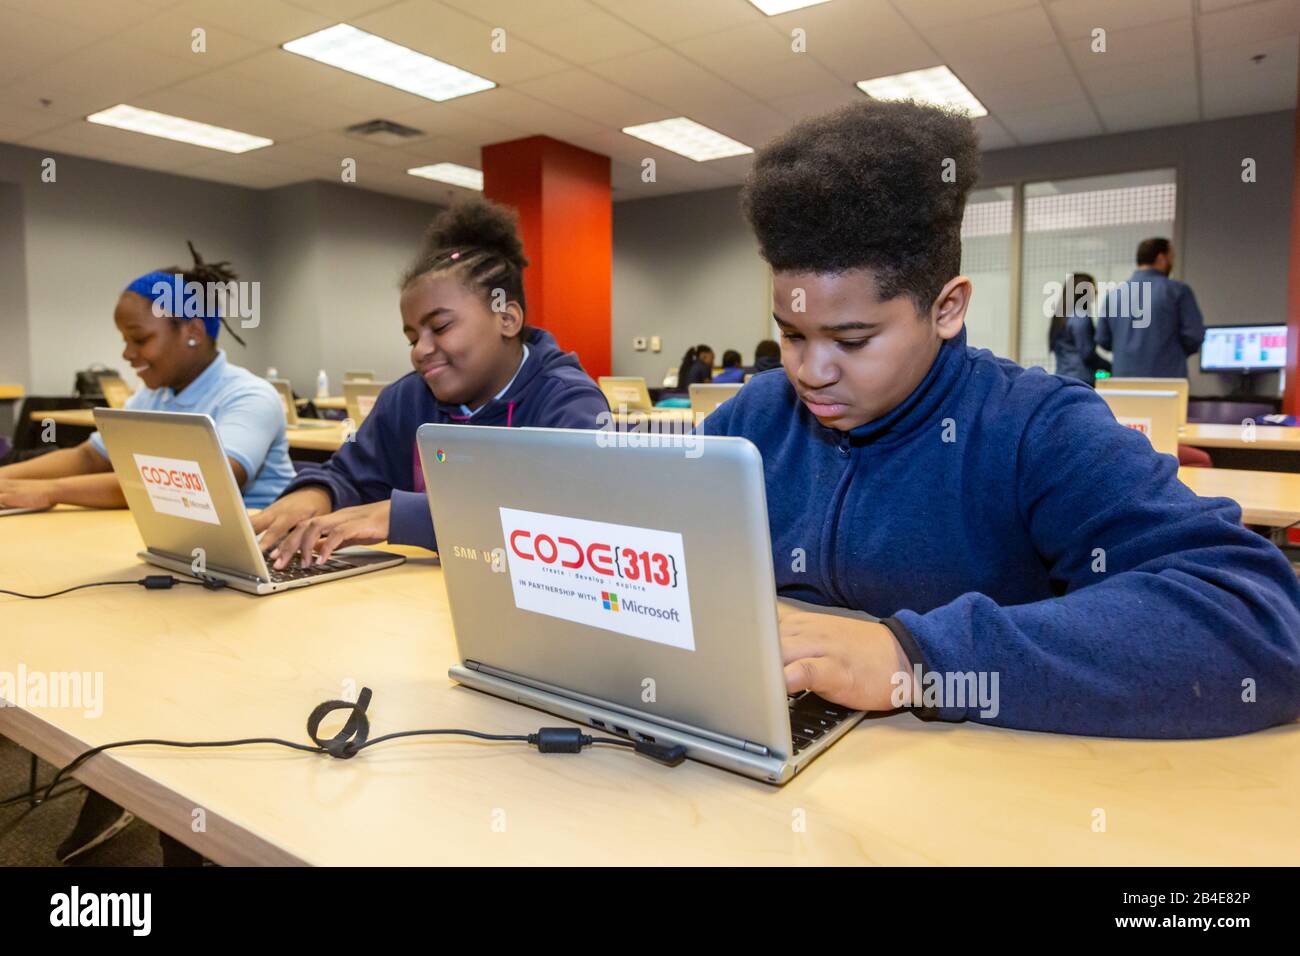 Detroit, Michigan - Code313, a nonprofit program for Detroit youth aged 7-17, offers free workshops on computer coding and other technology-based subj Stock Photo